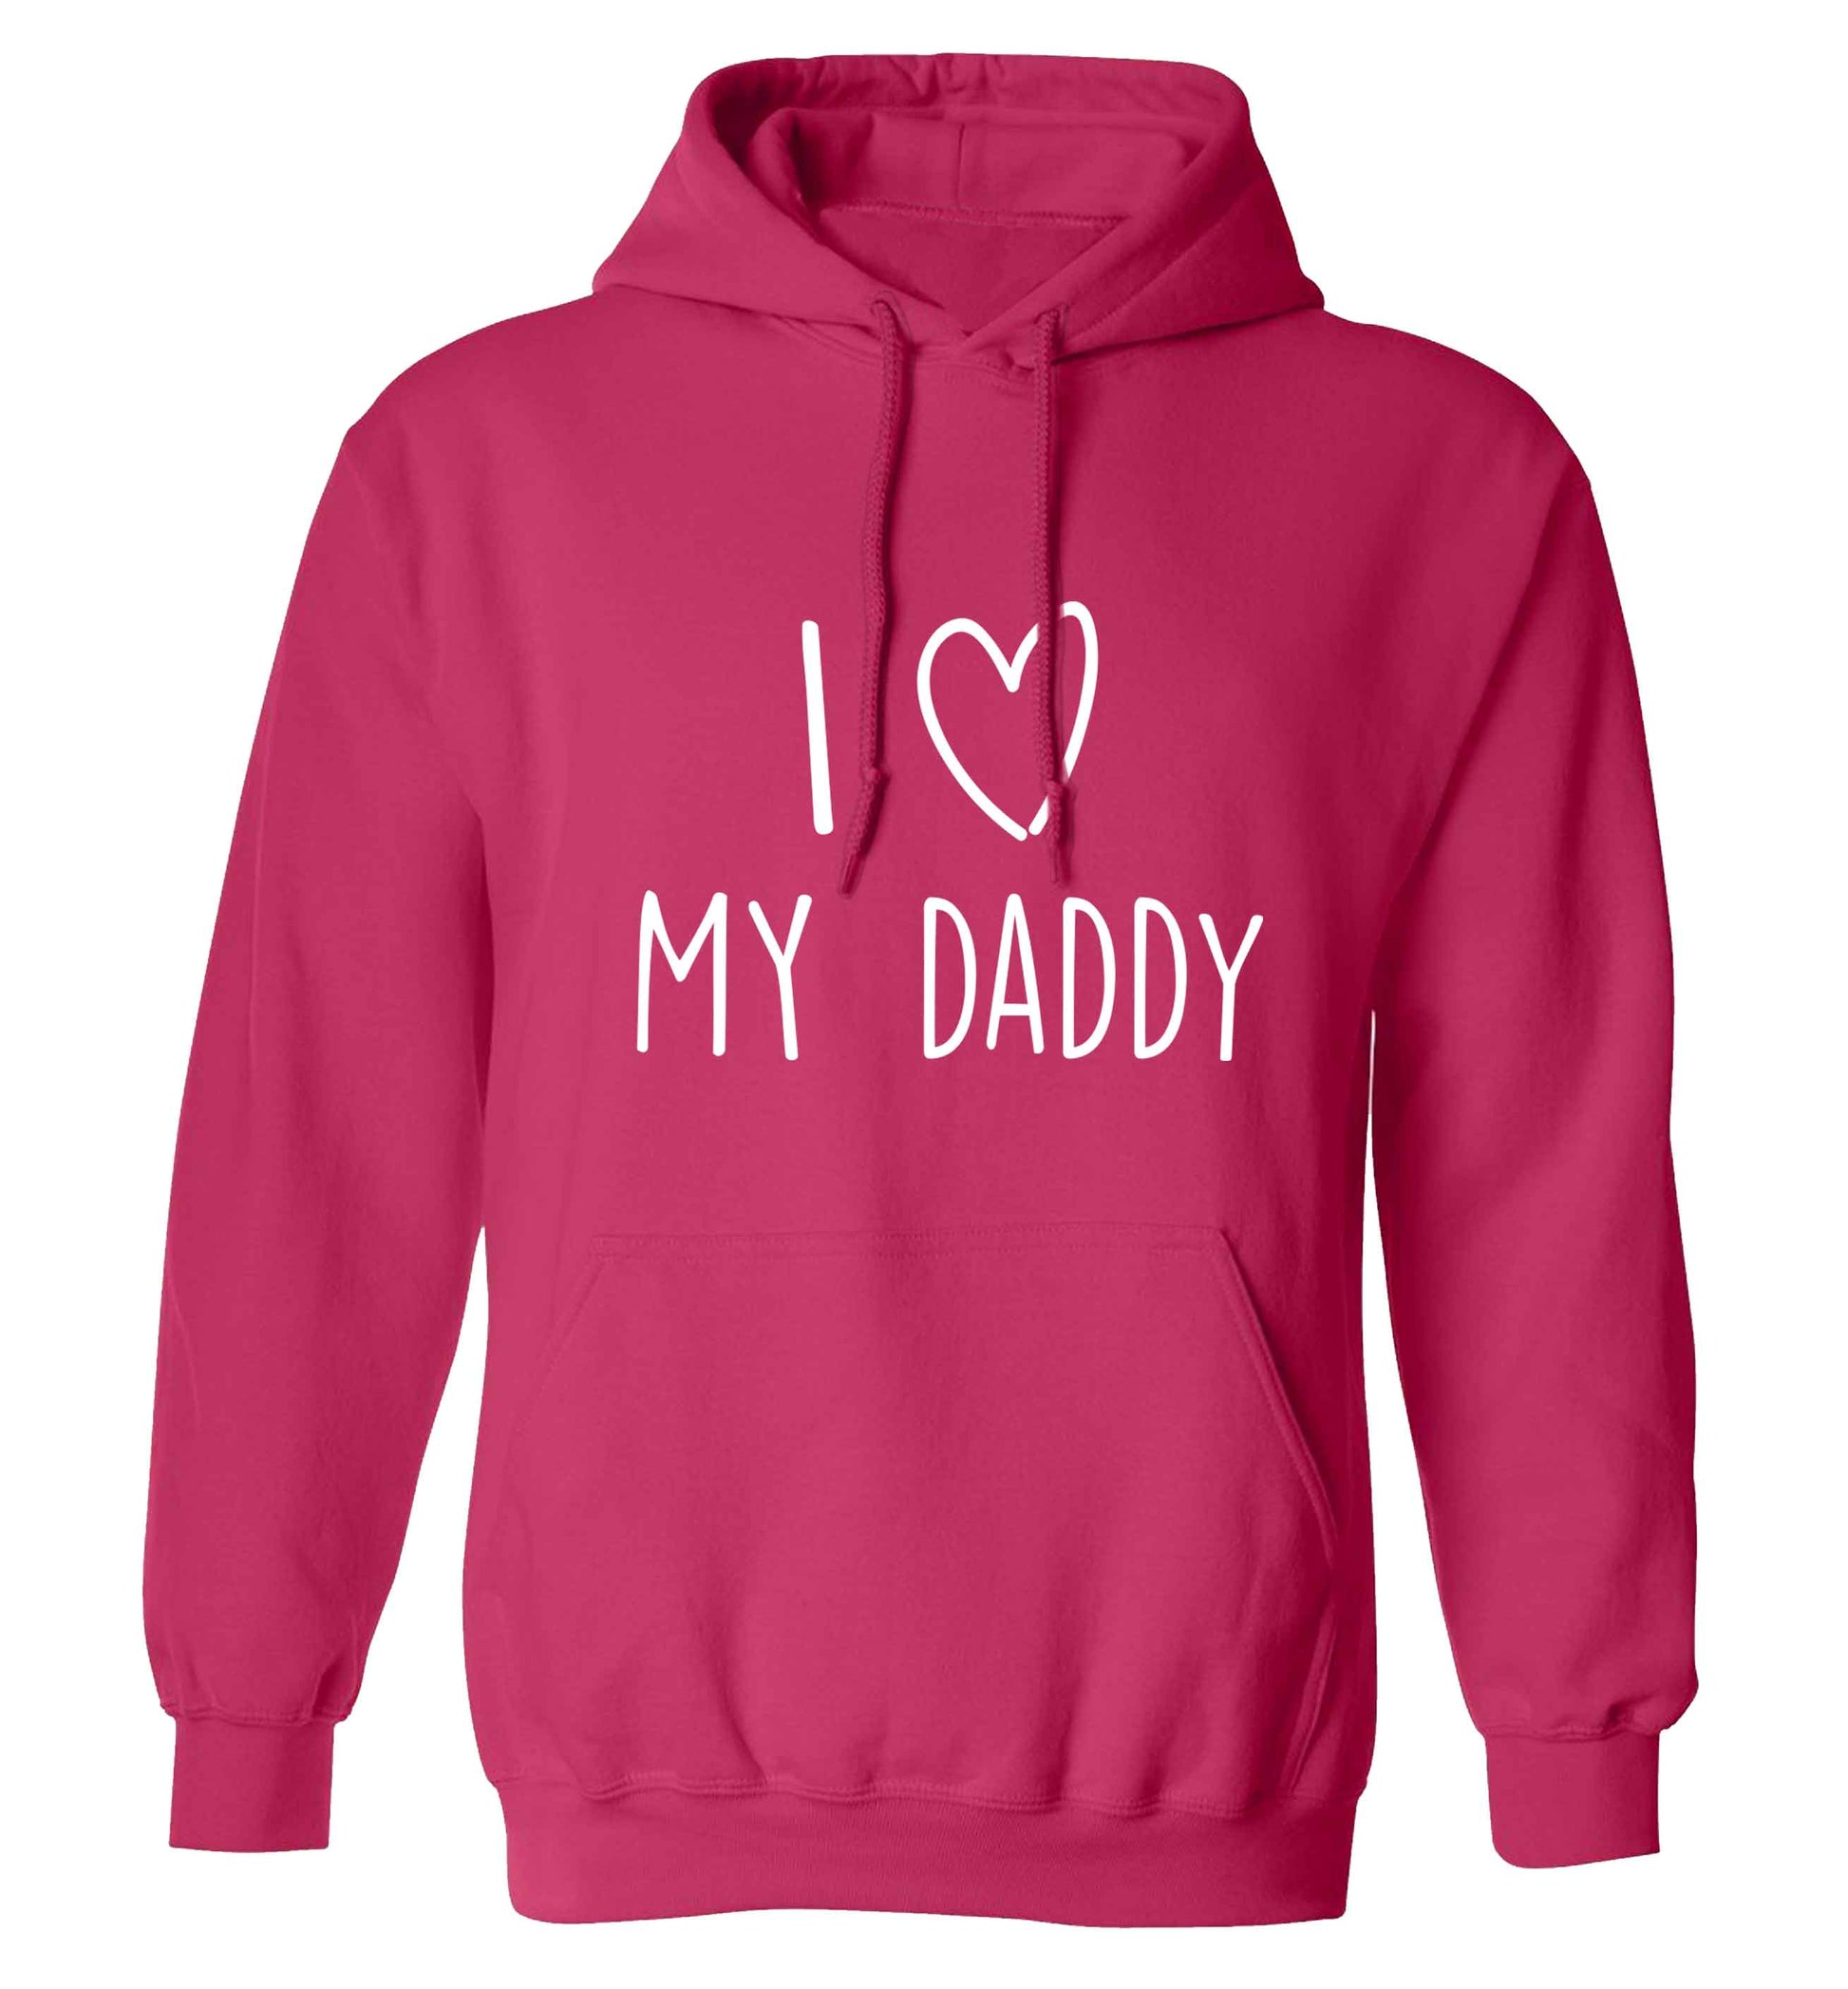 I love my daddy adults unisex pink hoodie 2XL